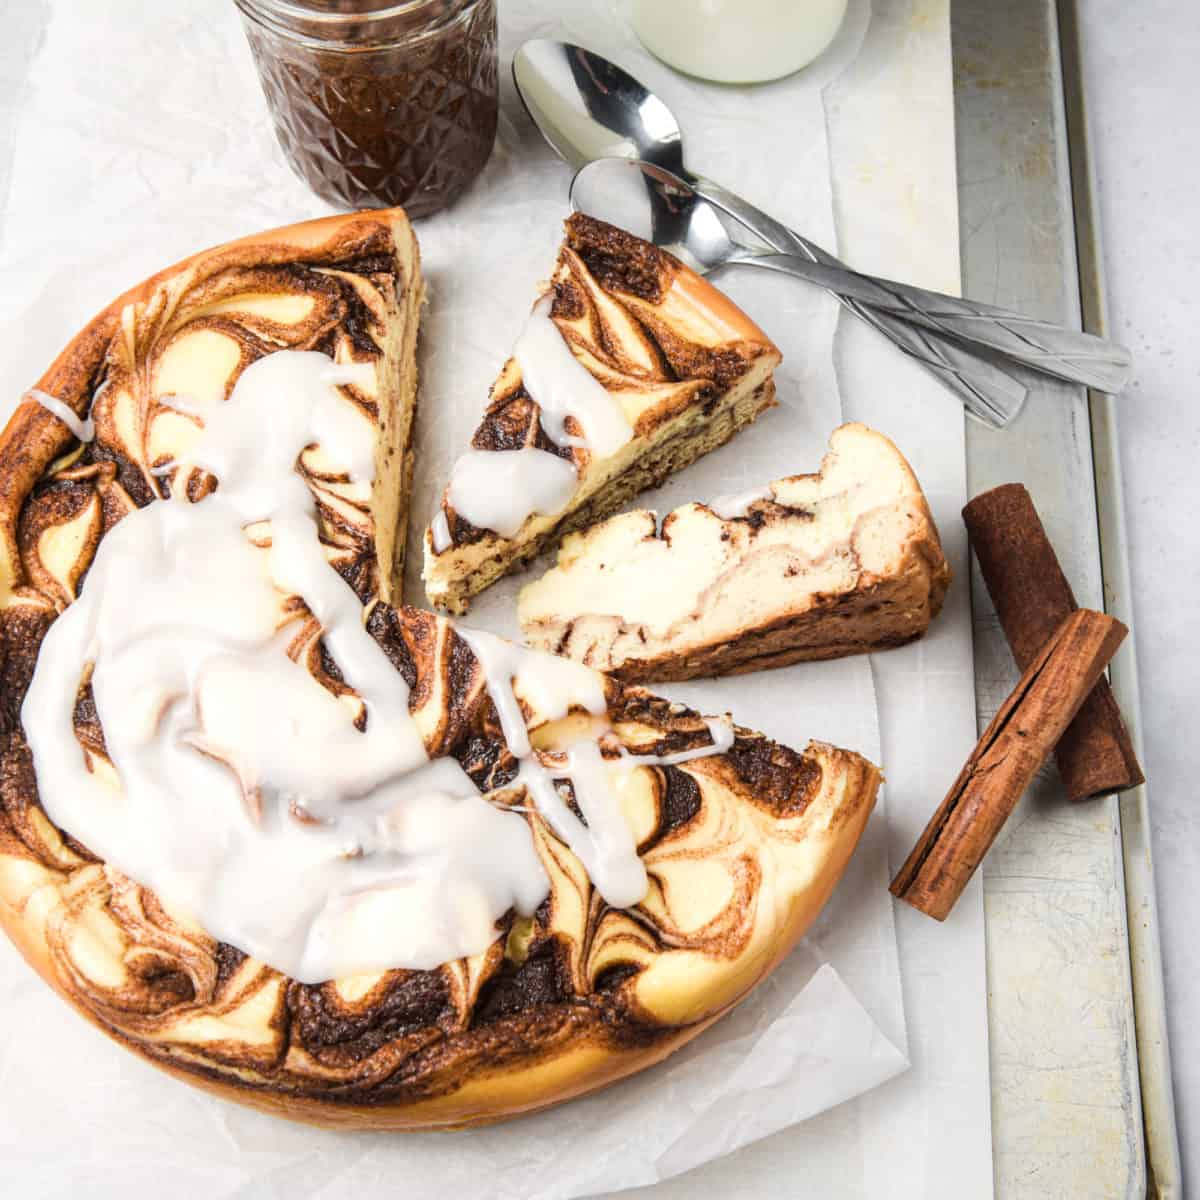 A cinnamon roll cheese cake ready to be served.